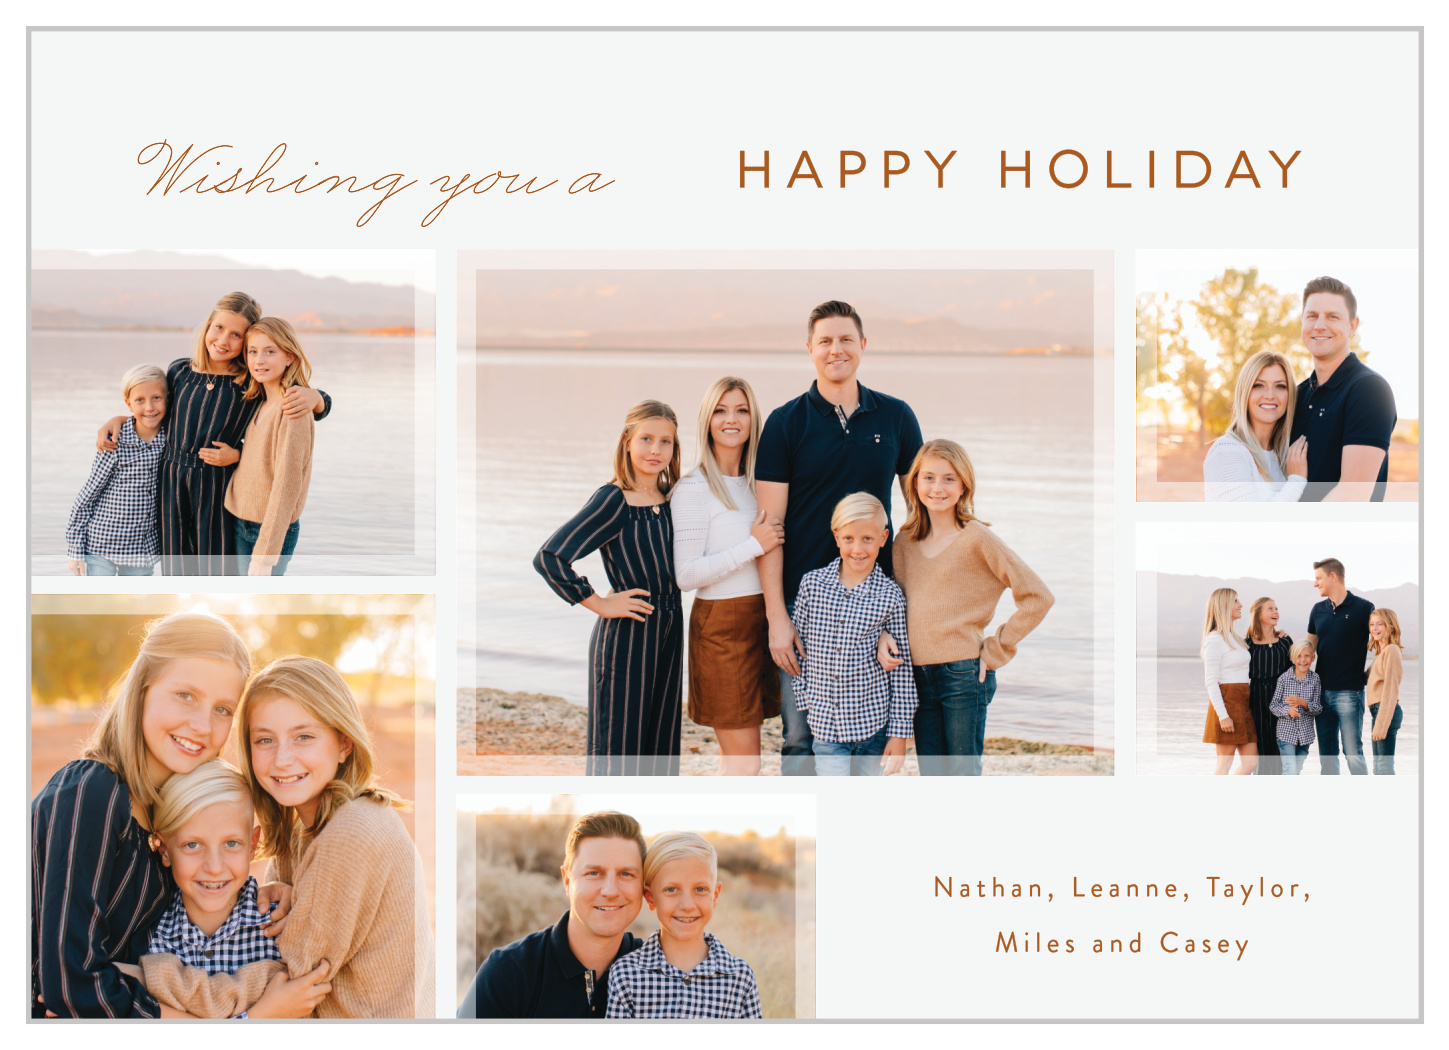 Holiday Wishes Holiday Cards